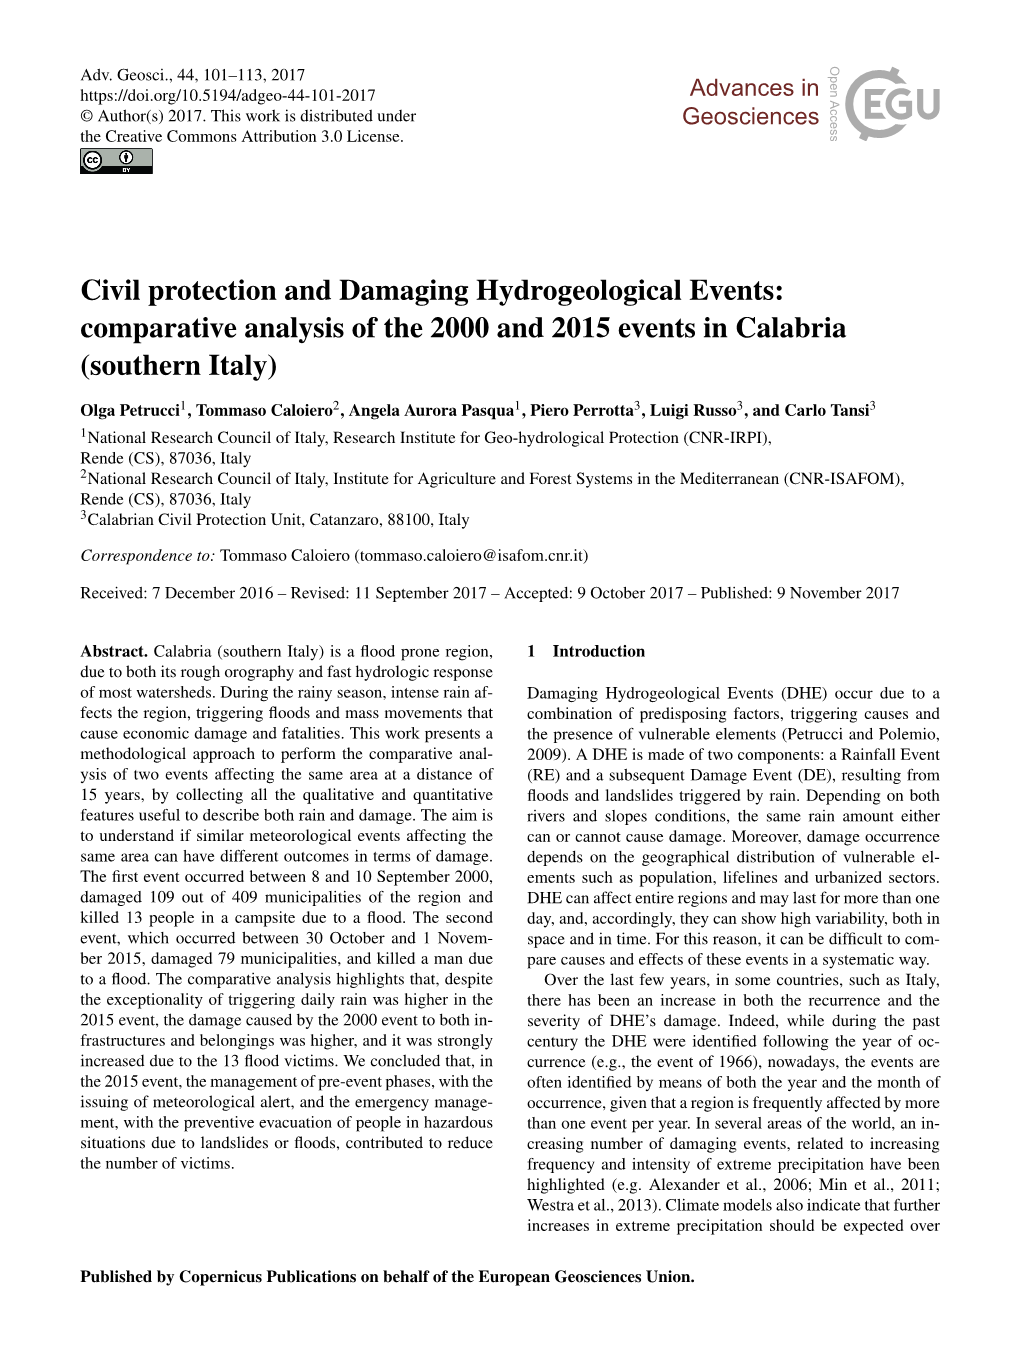 Civil Protection and Damaging Hydrogeological Events: Comparative Analysis of the 2000 and 2015 Events in Calabria (Southern Italy)